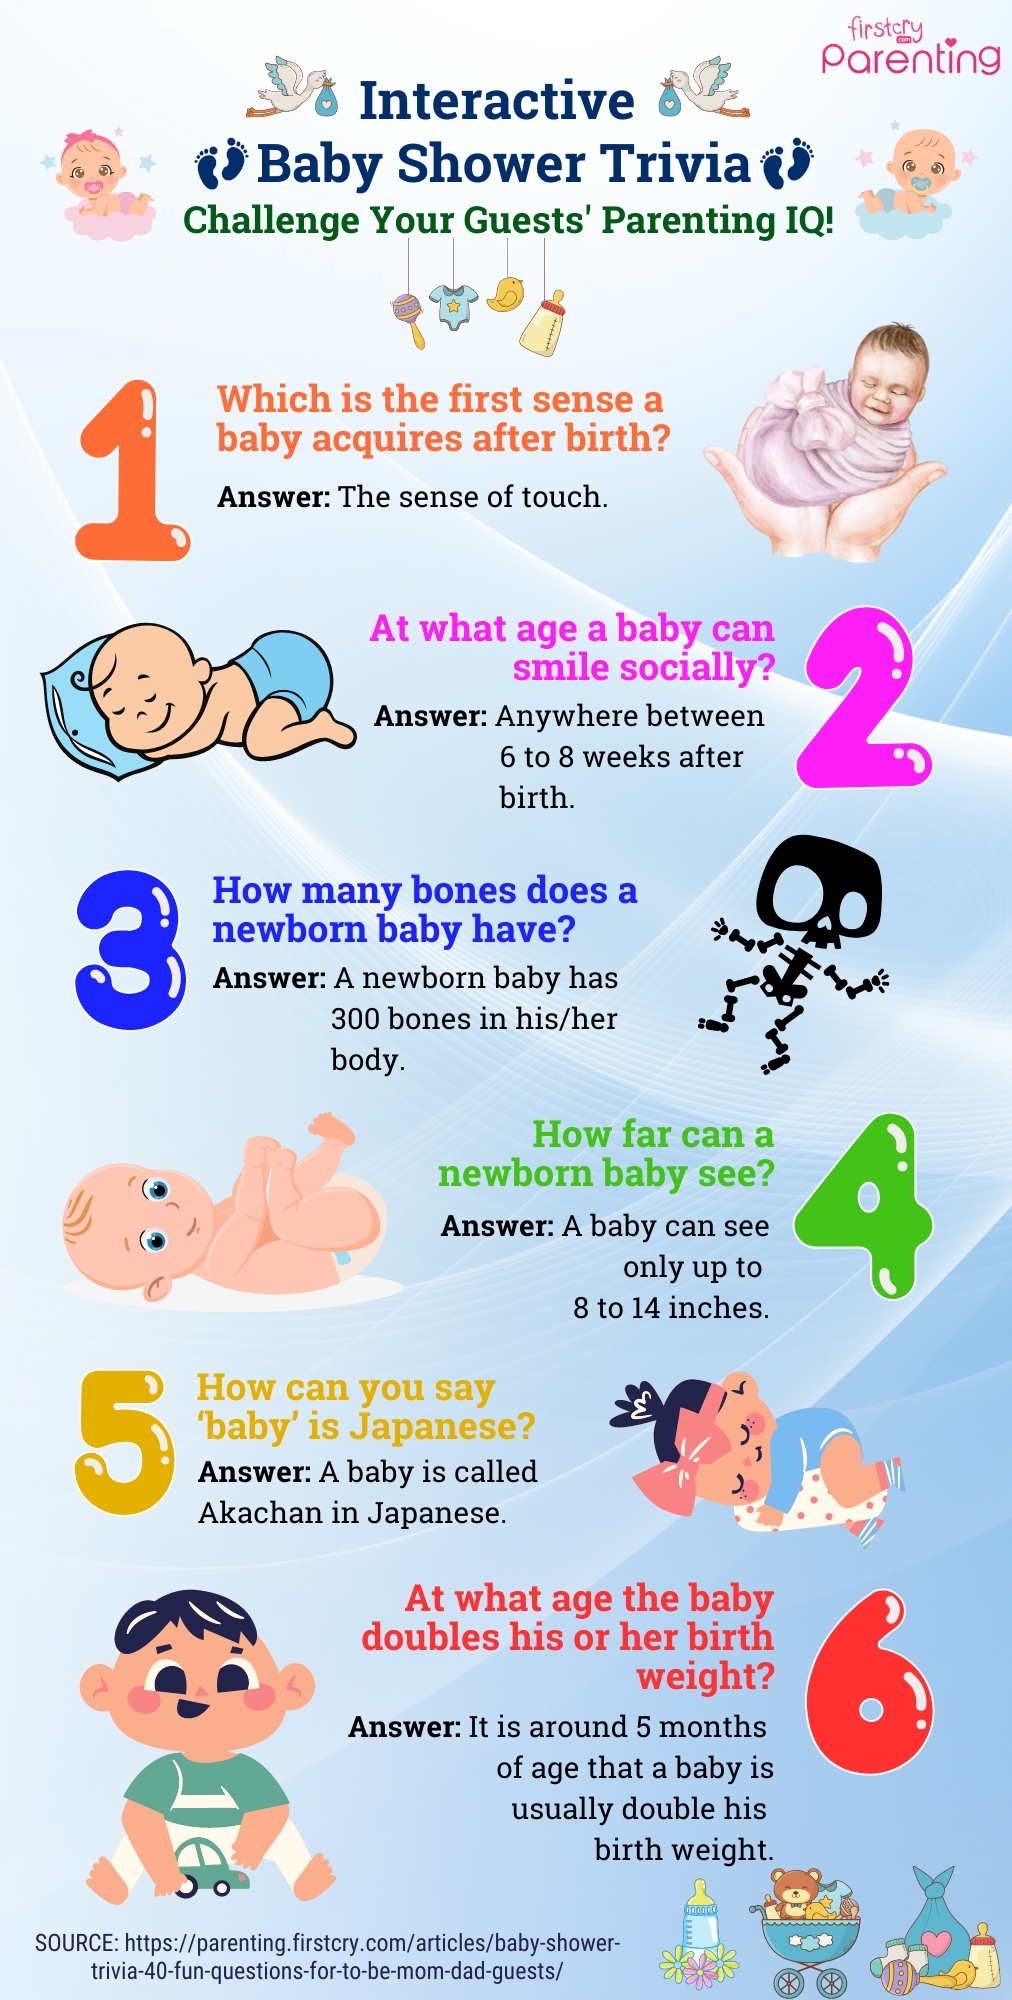 Interactive Baby Shower Trivia Challenge Your Guests' Parenting IQ! - Infographic